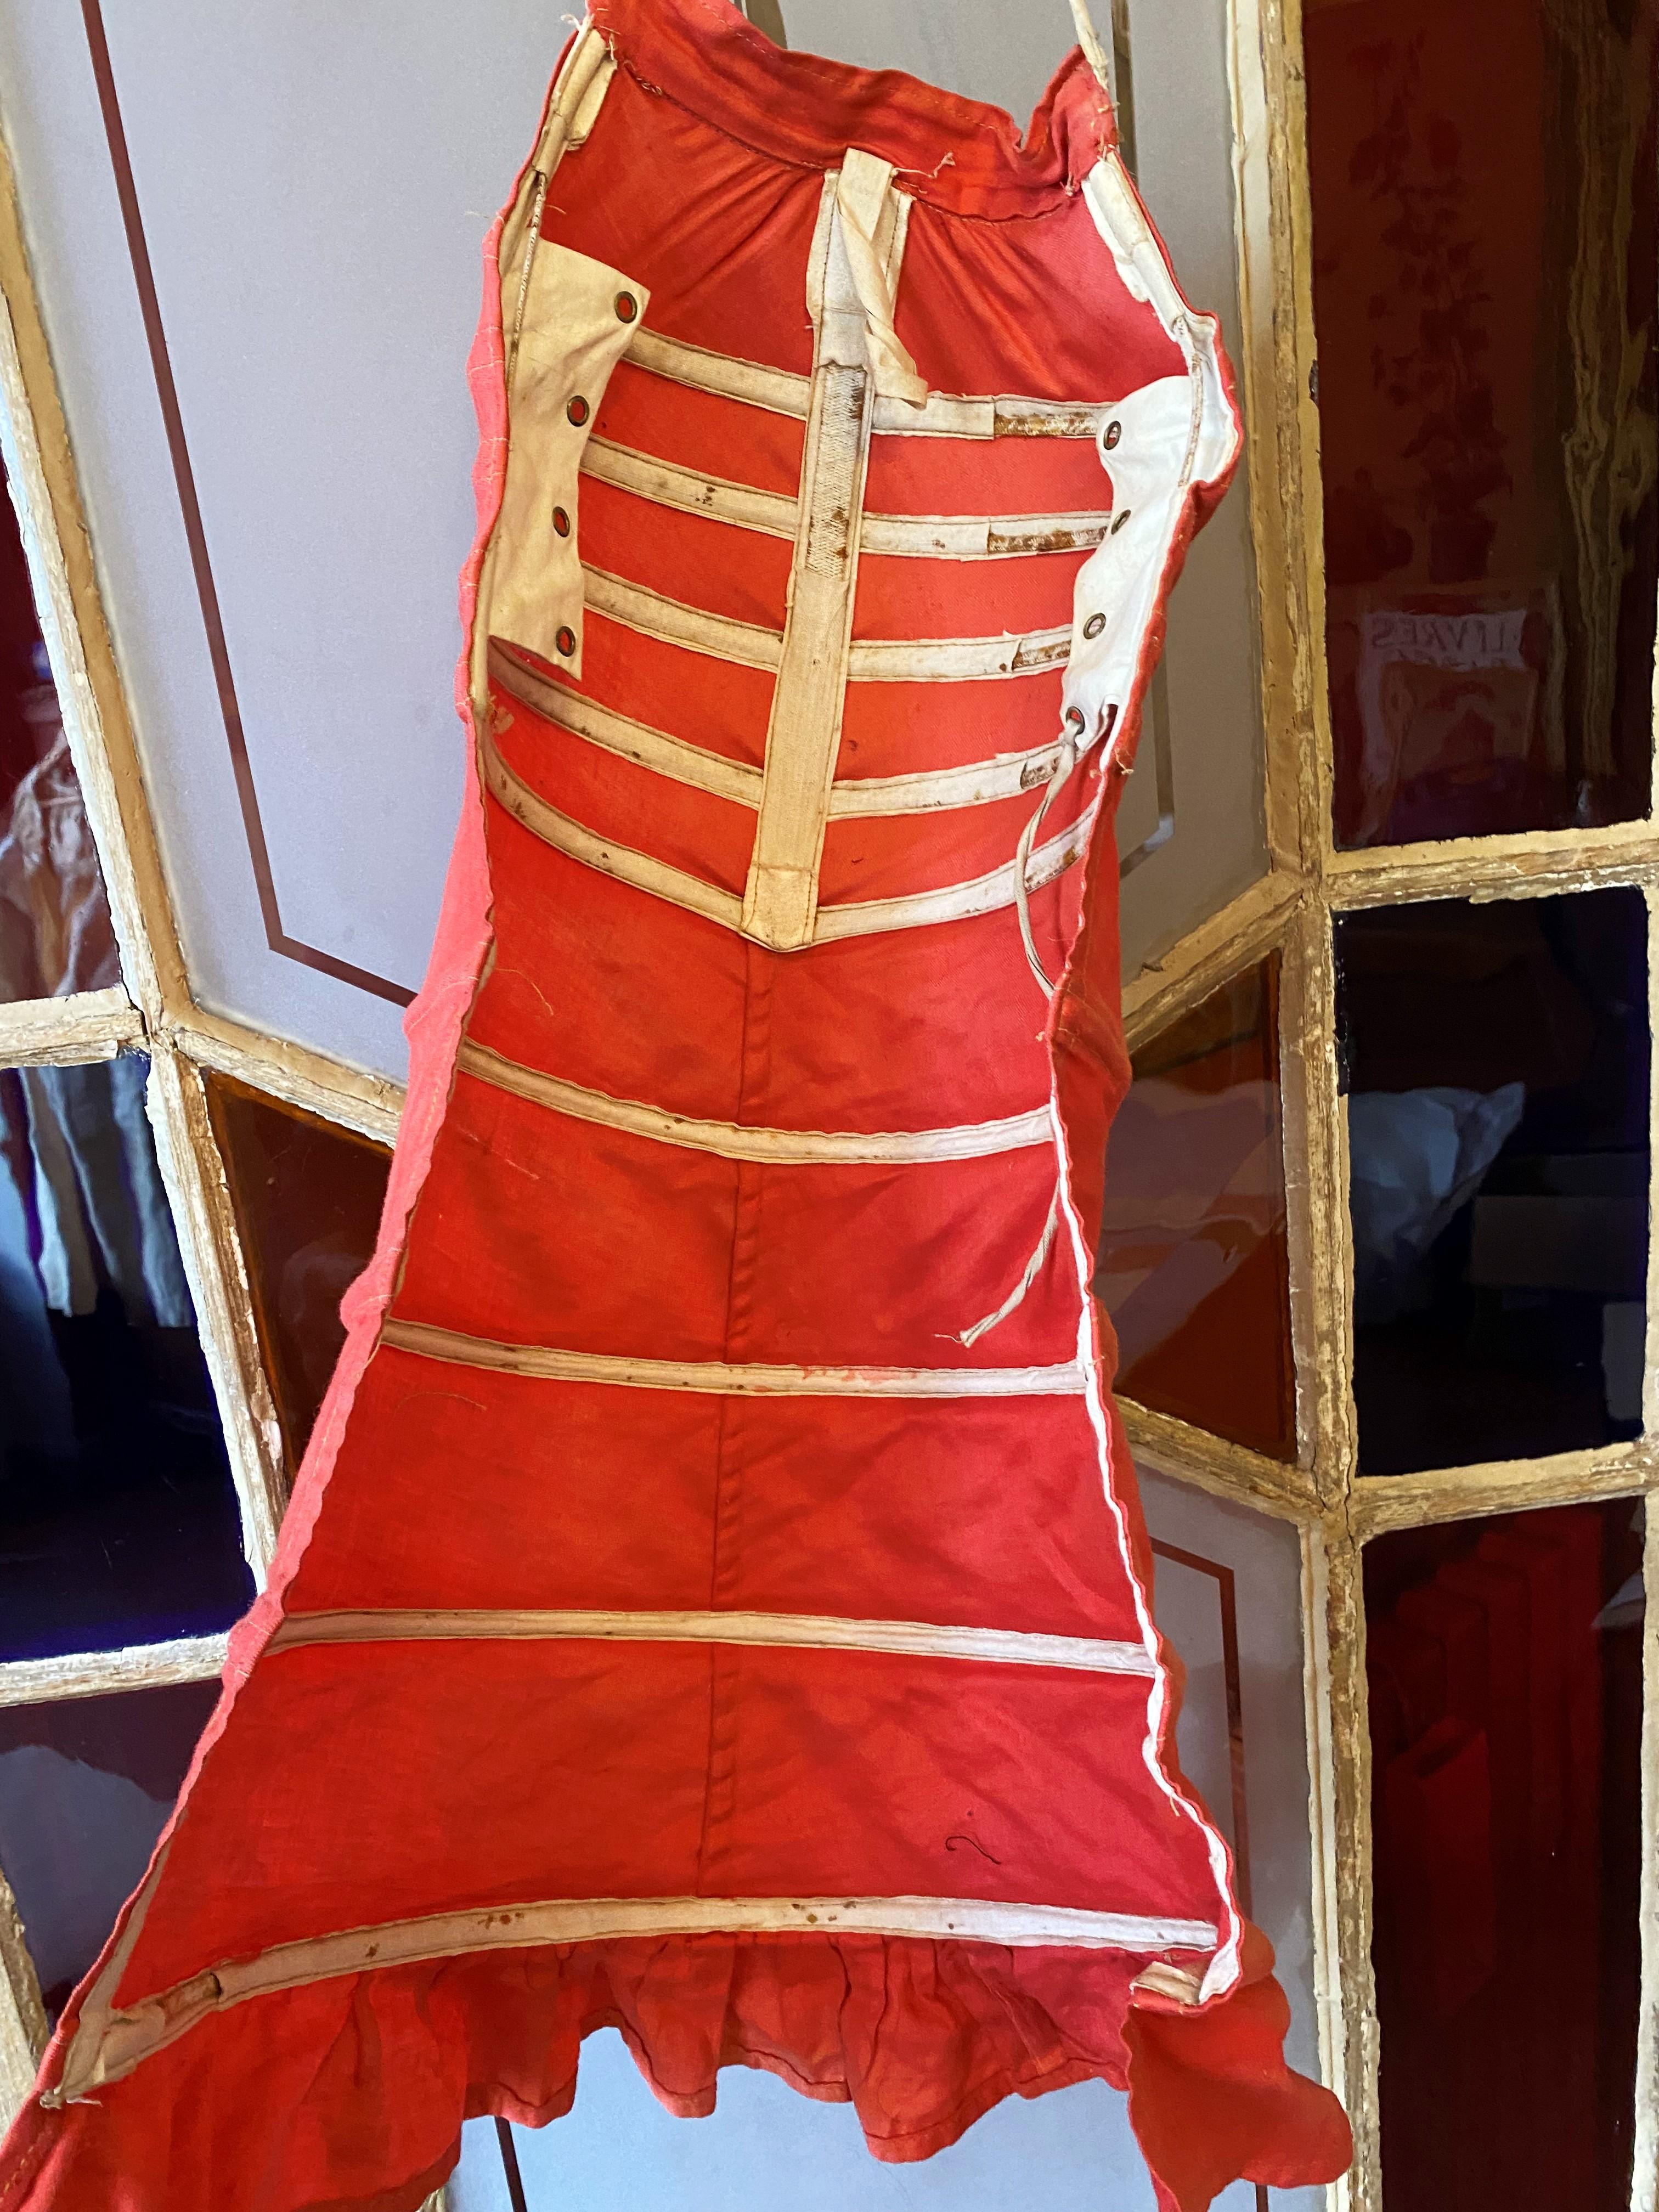 Circa 1875 - 1895
France or Europe

Small Bustle cage to refine the Silhouette called Queue d'écrevisse in scarlet cotton twill dating from the late 19th century. Nine metal hoops covered with cotton. Legs with eyelets and cotton ties (one replaced